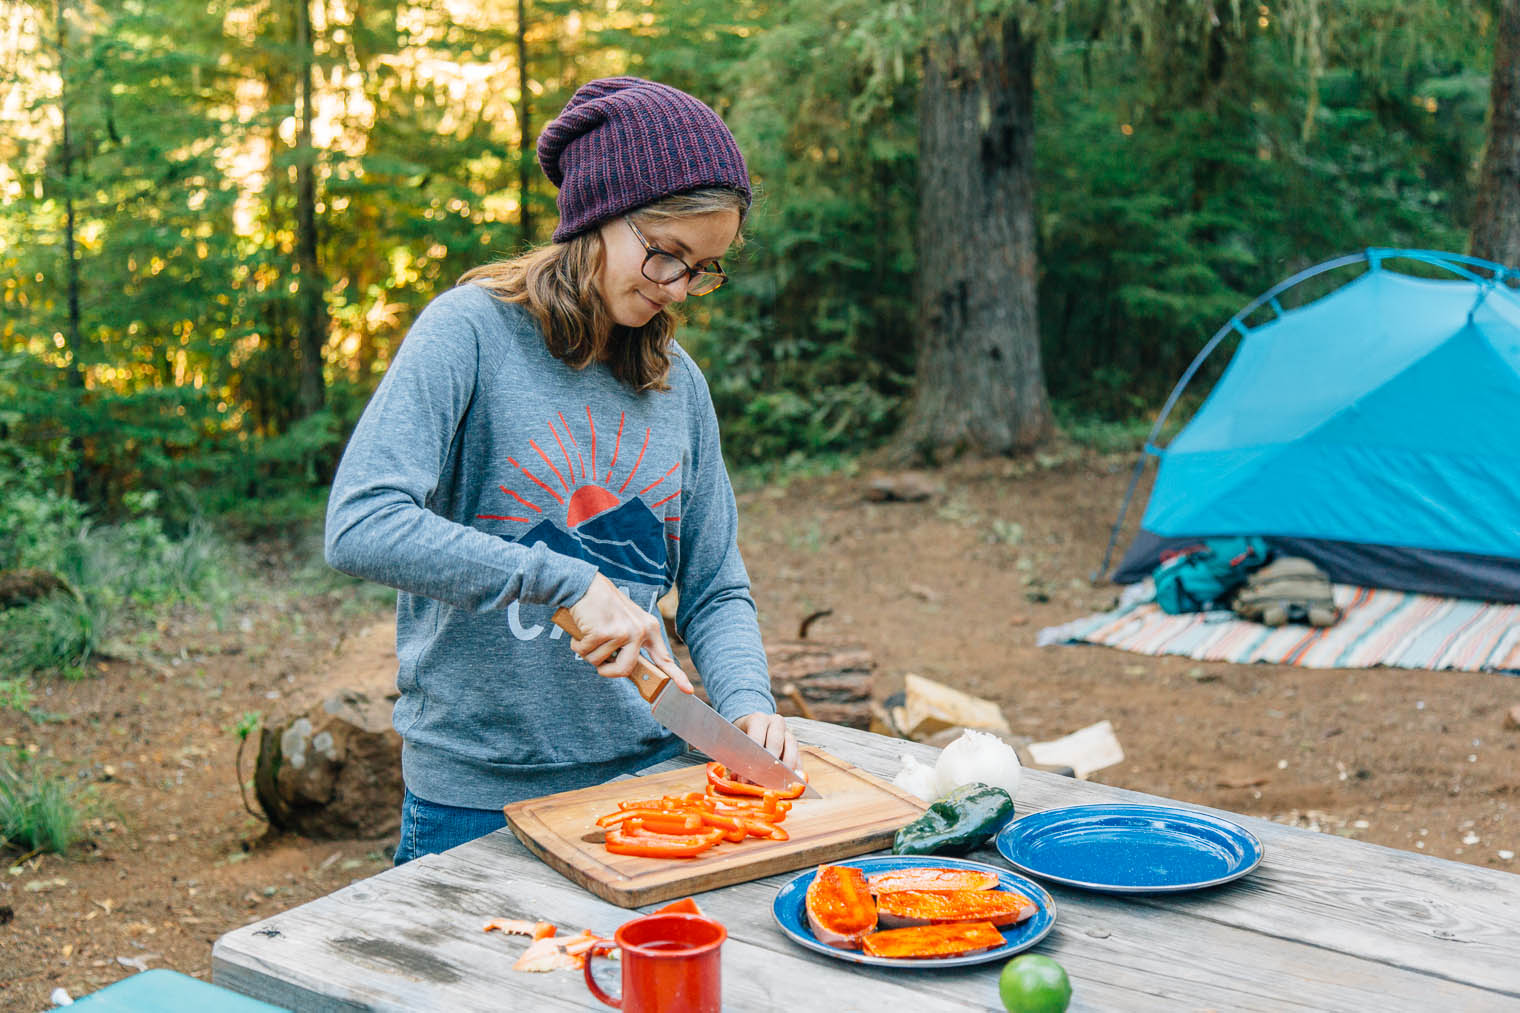 Megan standing at a camp table chopping red bell peppers on a wooden cutting board